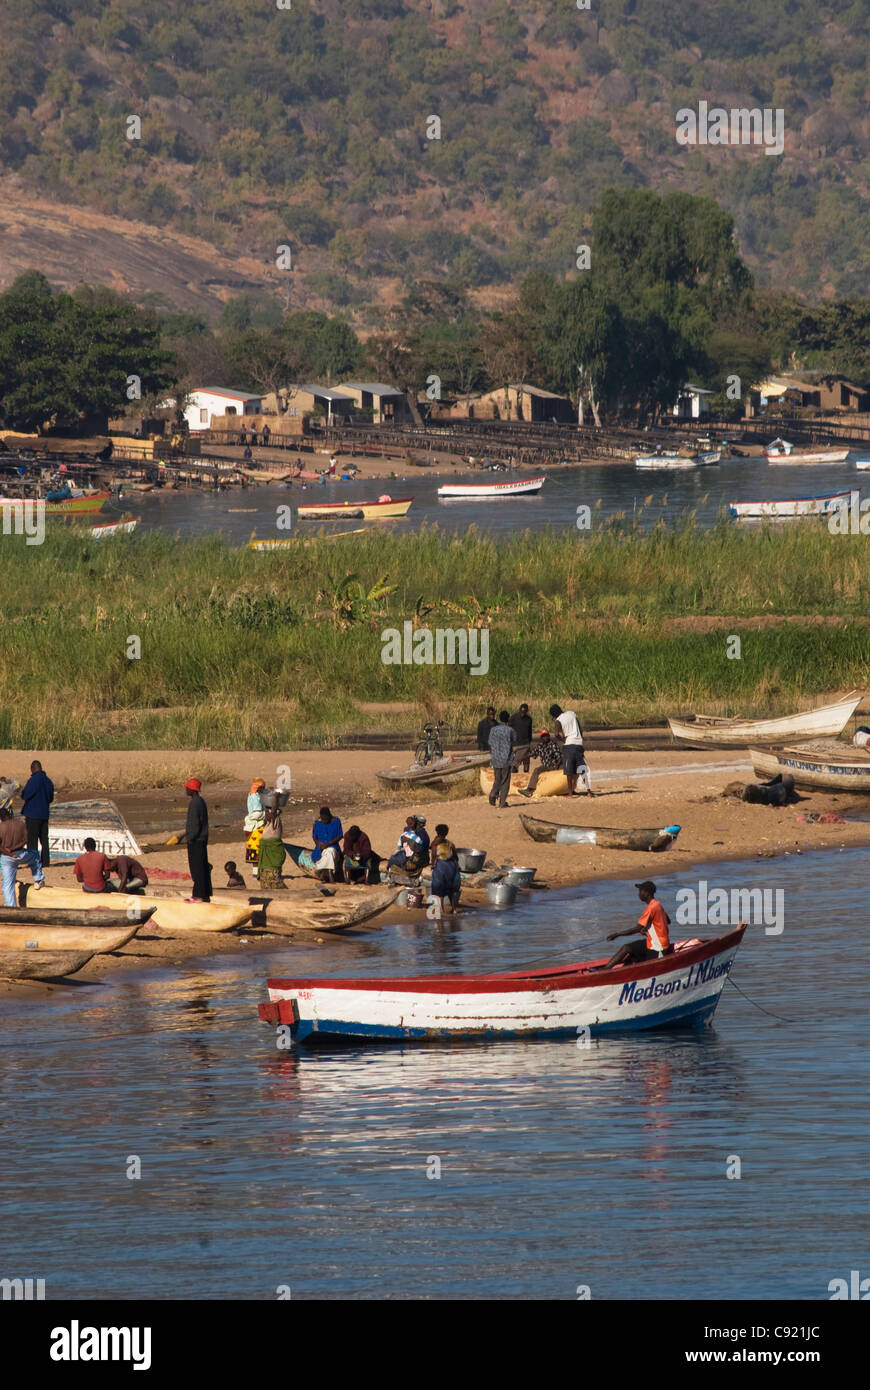 Malawian fishing villages stand on the Cape Maclear shoreline at the southern end of Lake Malawi. Stock Photo